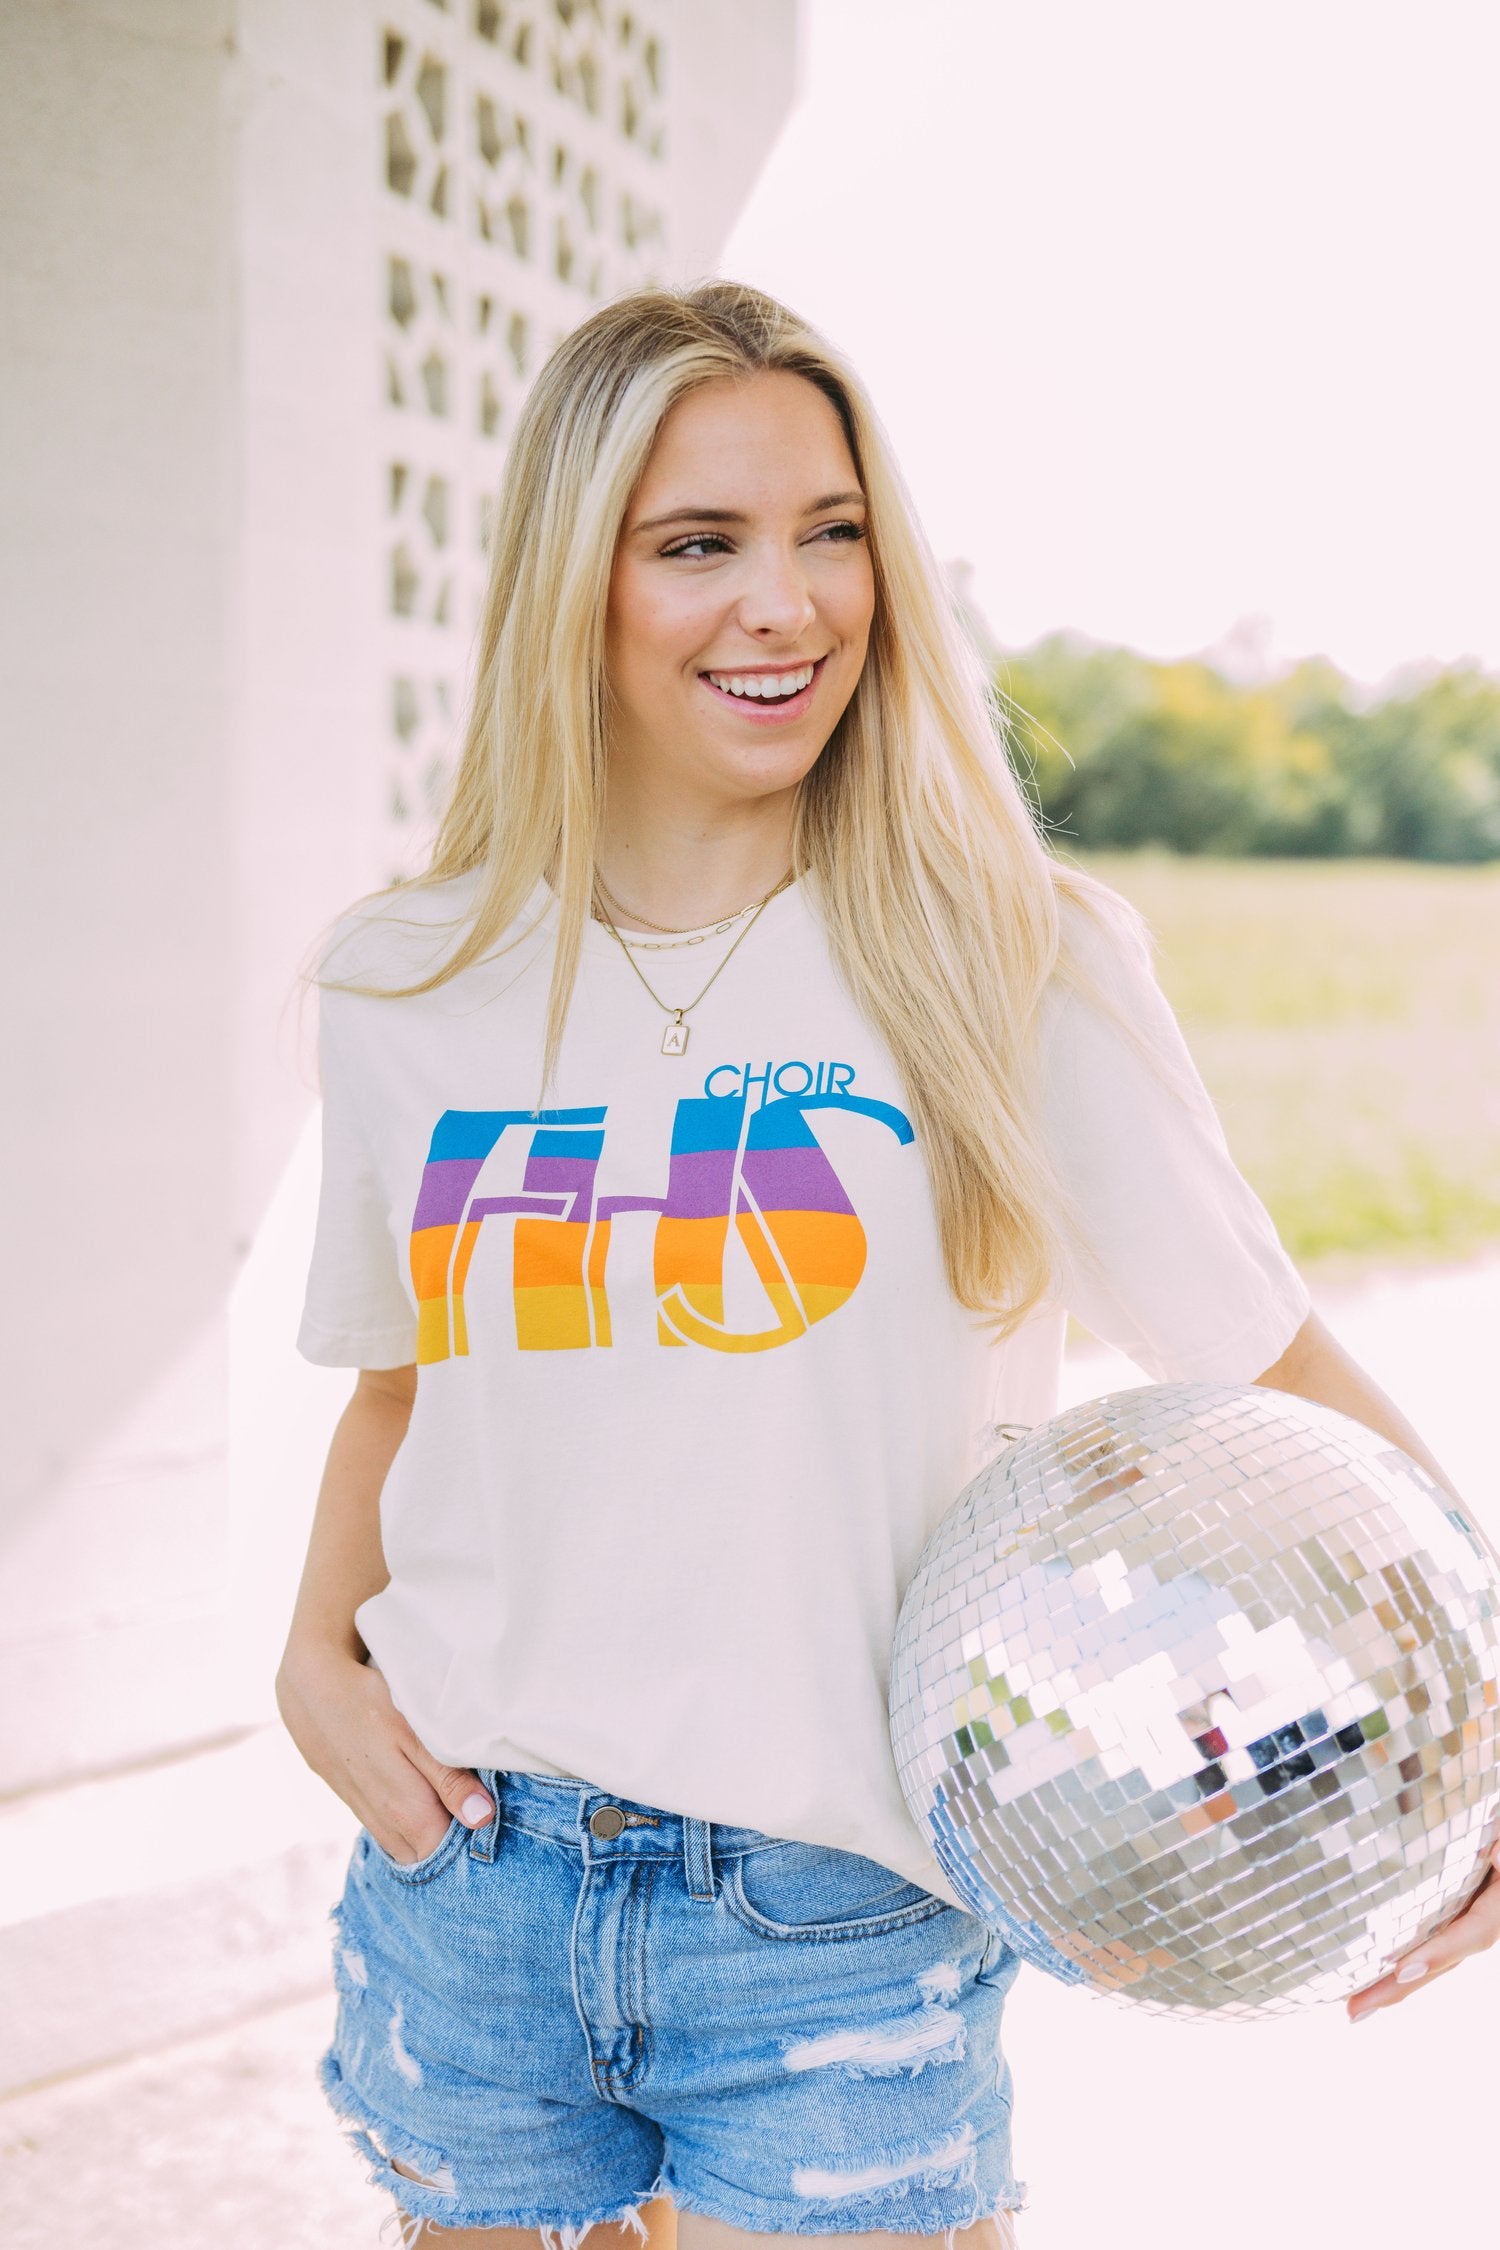 Girl stands in field and holds a disco ball. She wears a white tshirt with "FHS Choir" written across it.